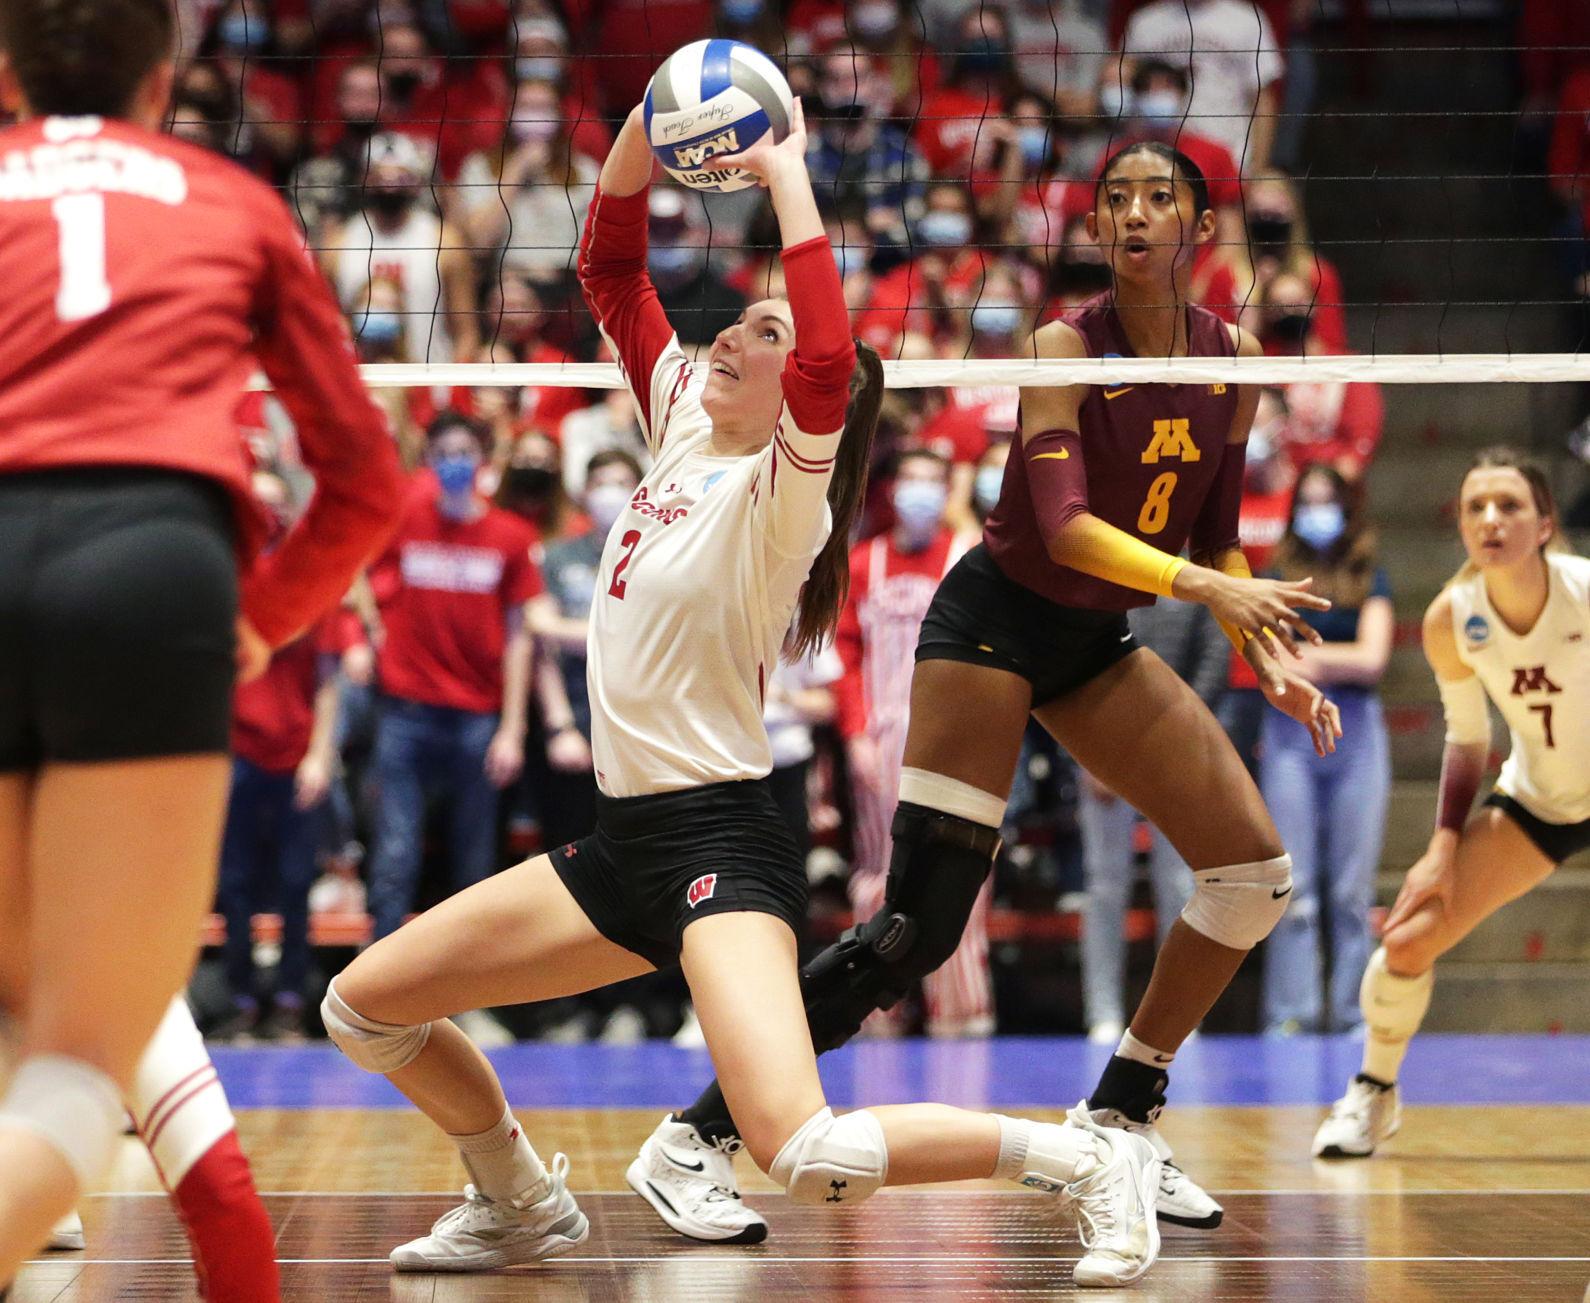 Wisconsin volleyball's Brittany Dildine named nation's top assistant coach